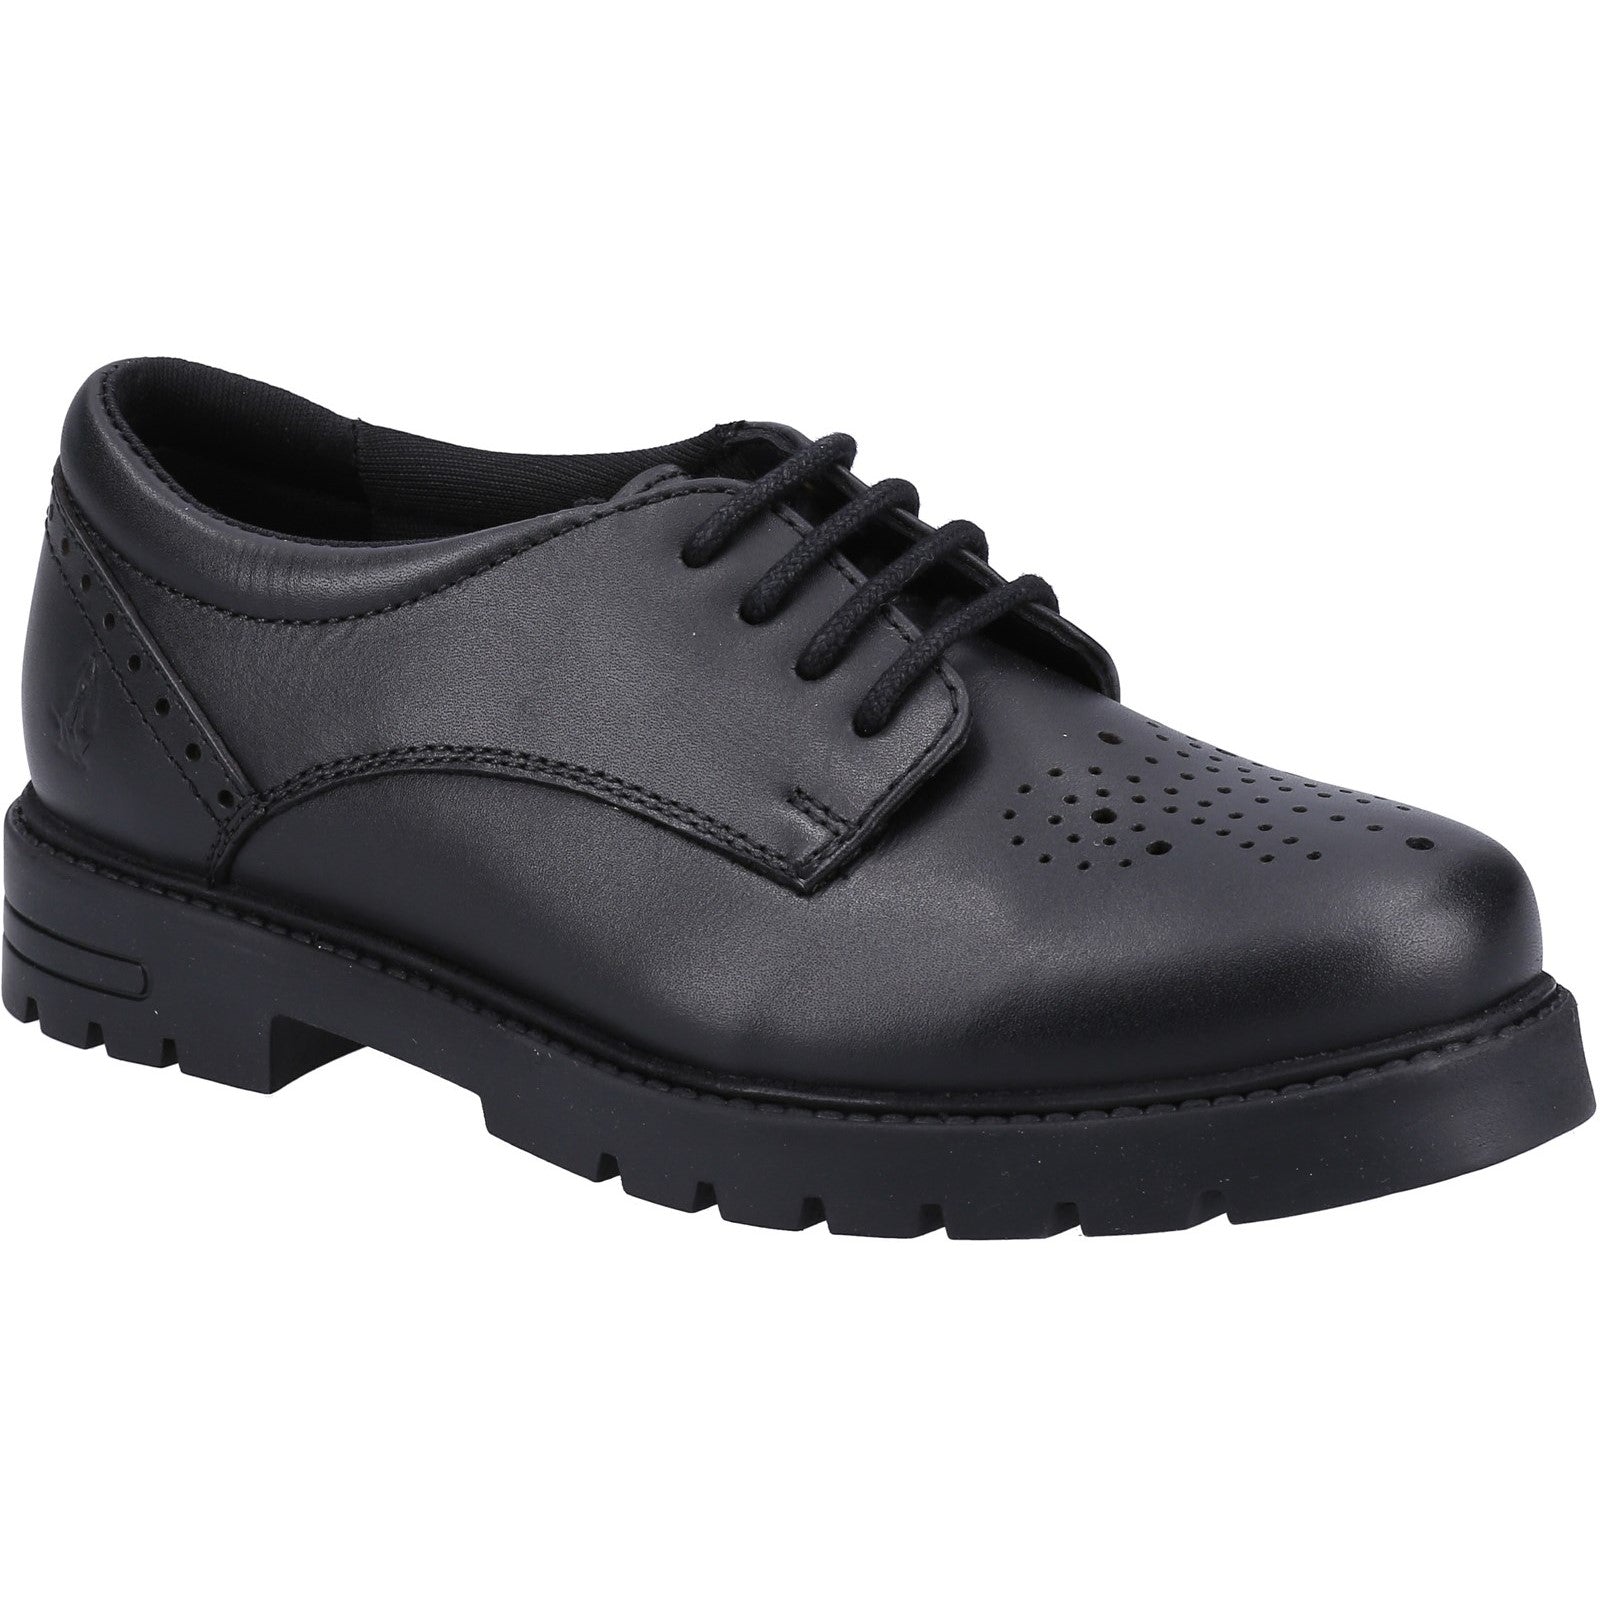 Hush Puppies Girls Jayne Lace Up Leather School Shoes - Black